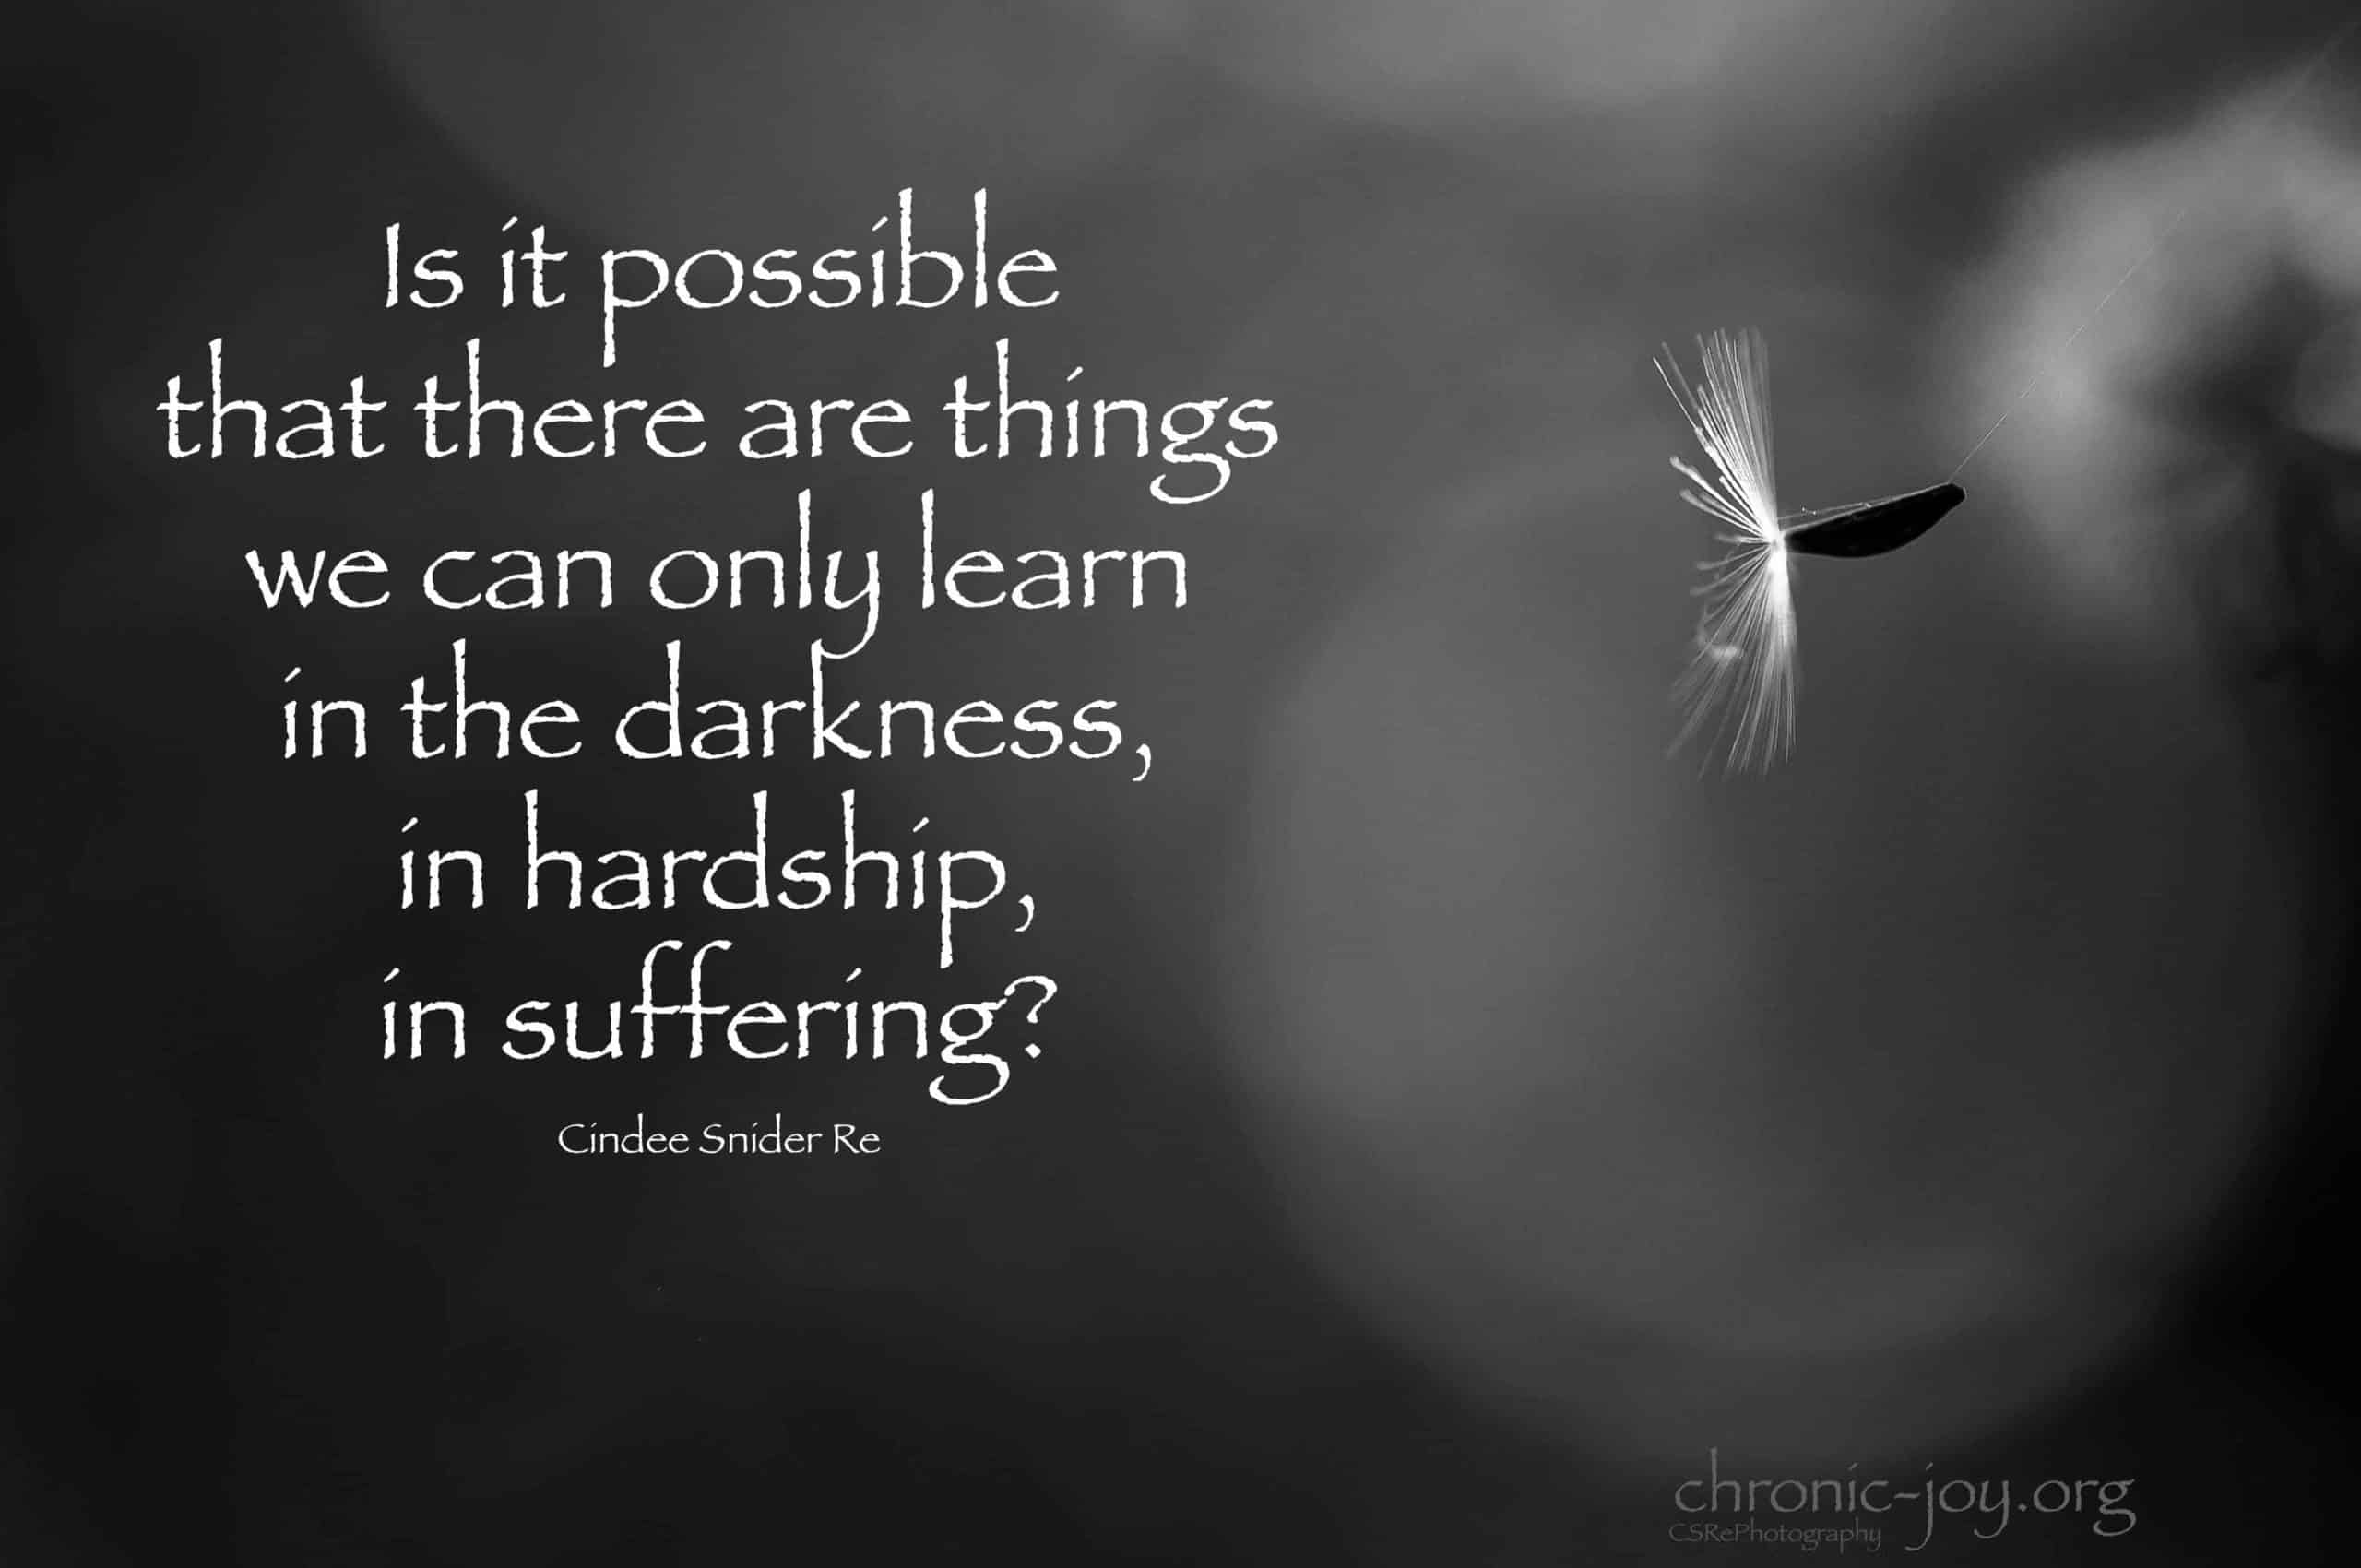 Is is possible there are things we can only learn in hardship?